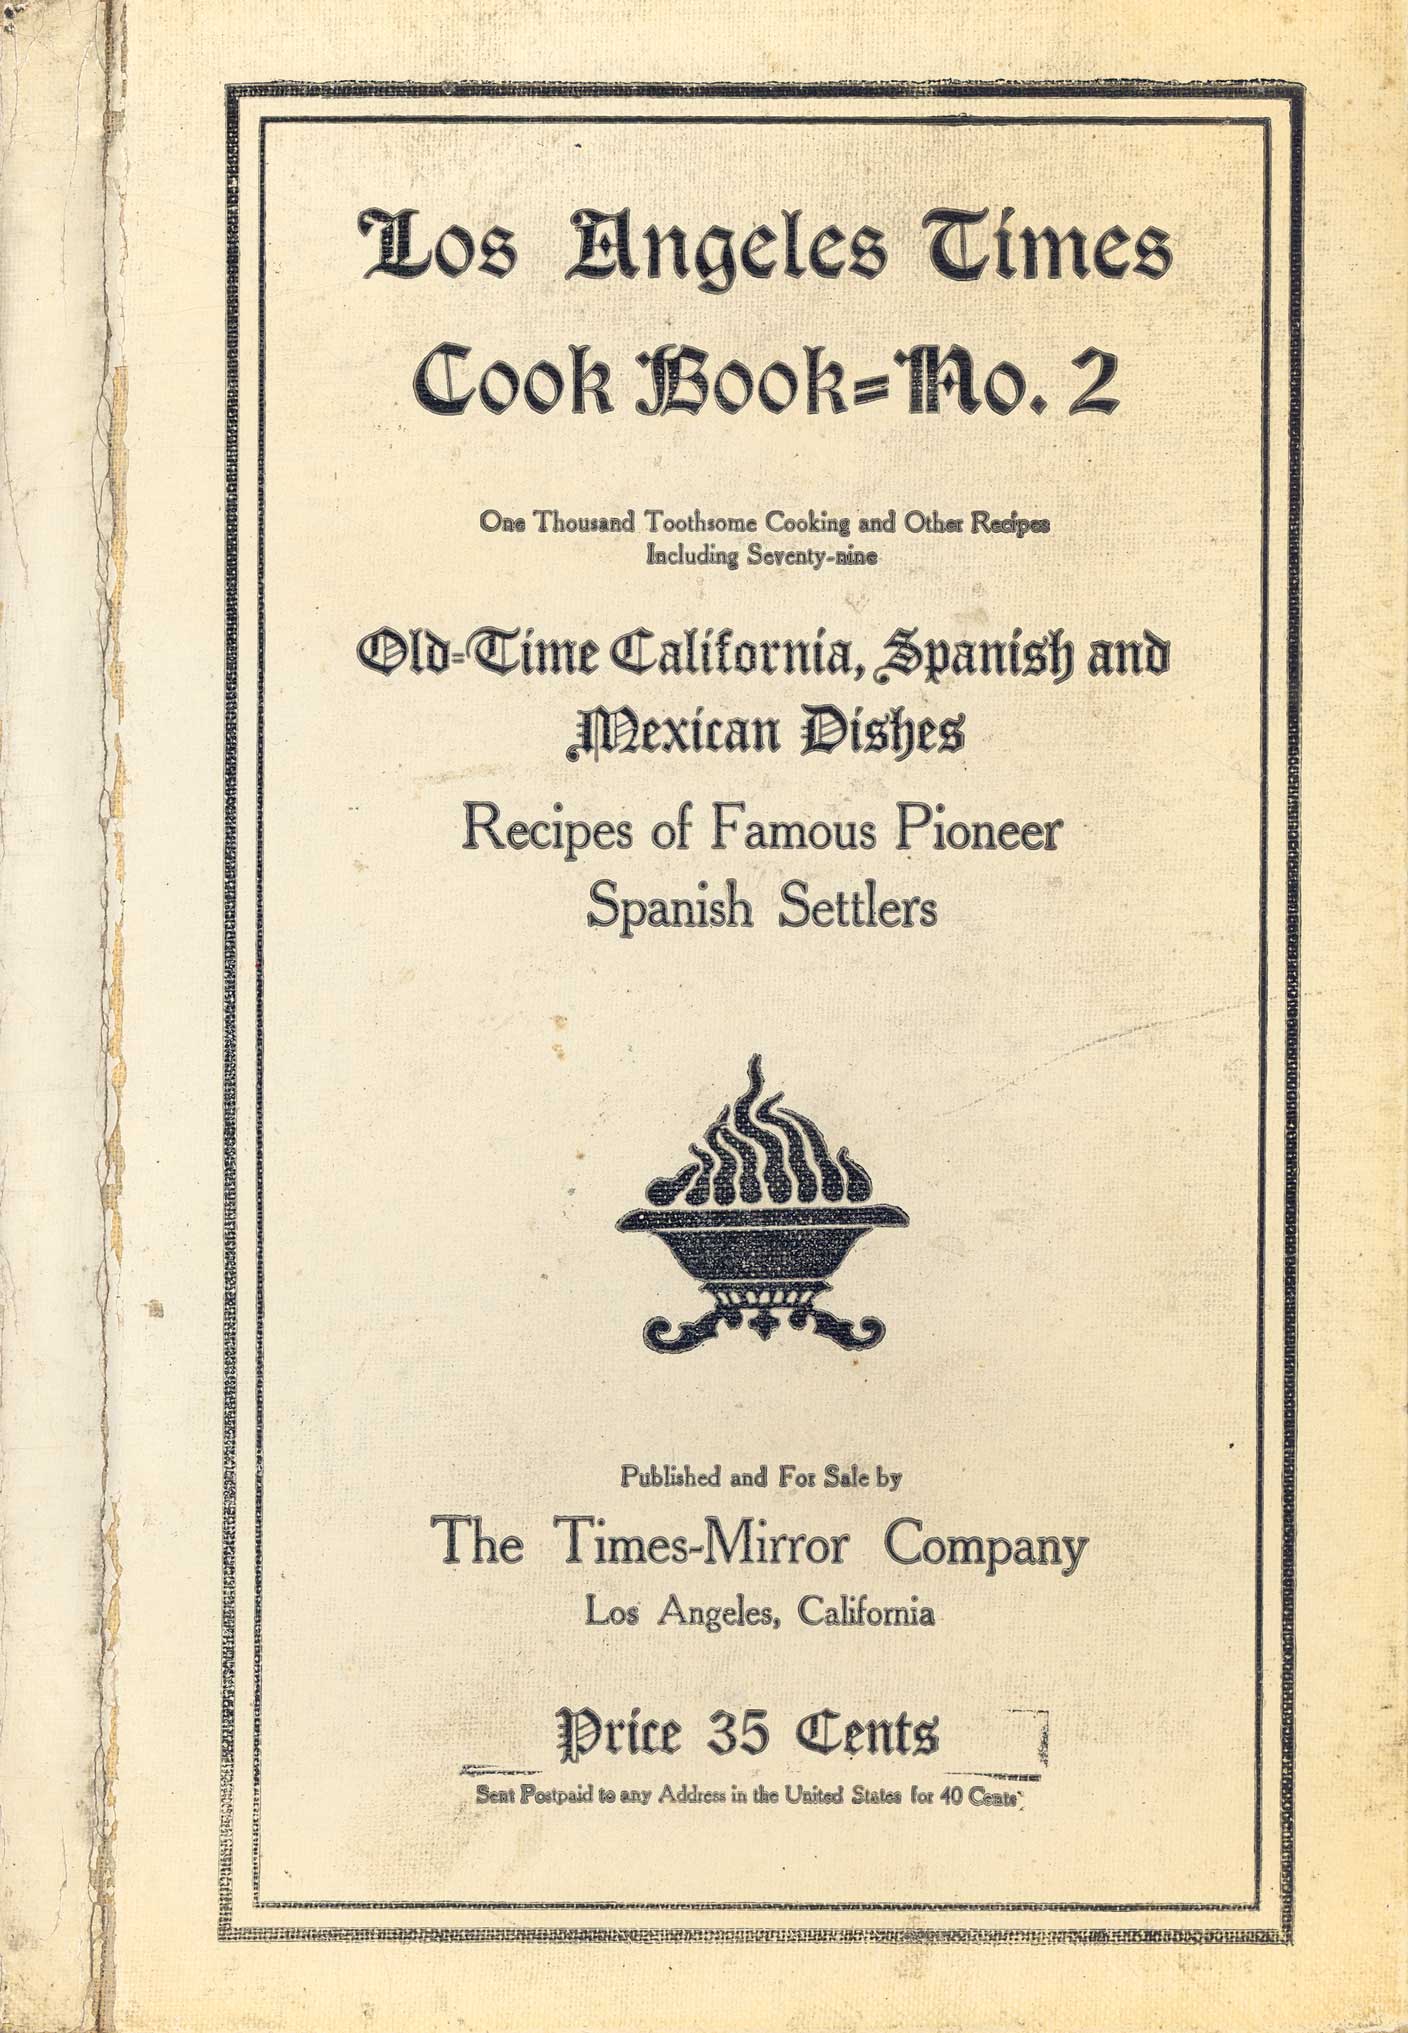 The Times cook book, no. 2 : 957 cooking and other recipes ...